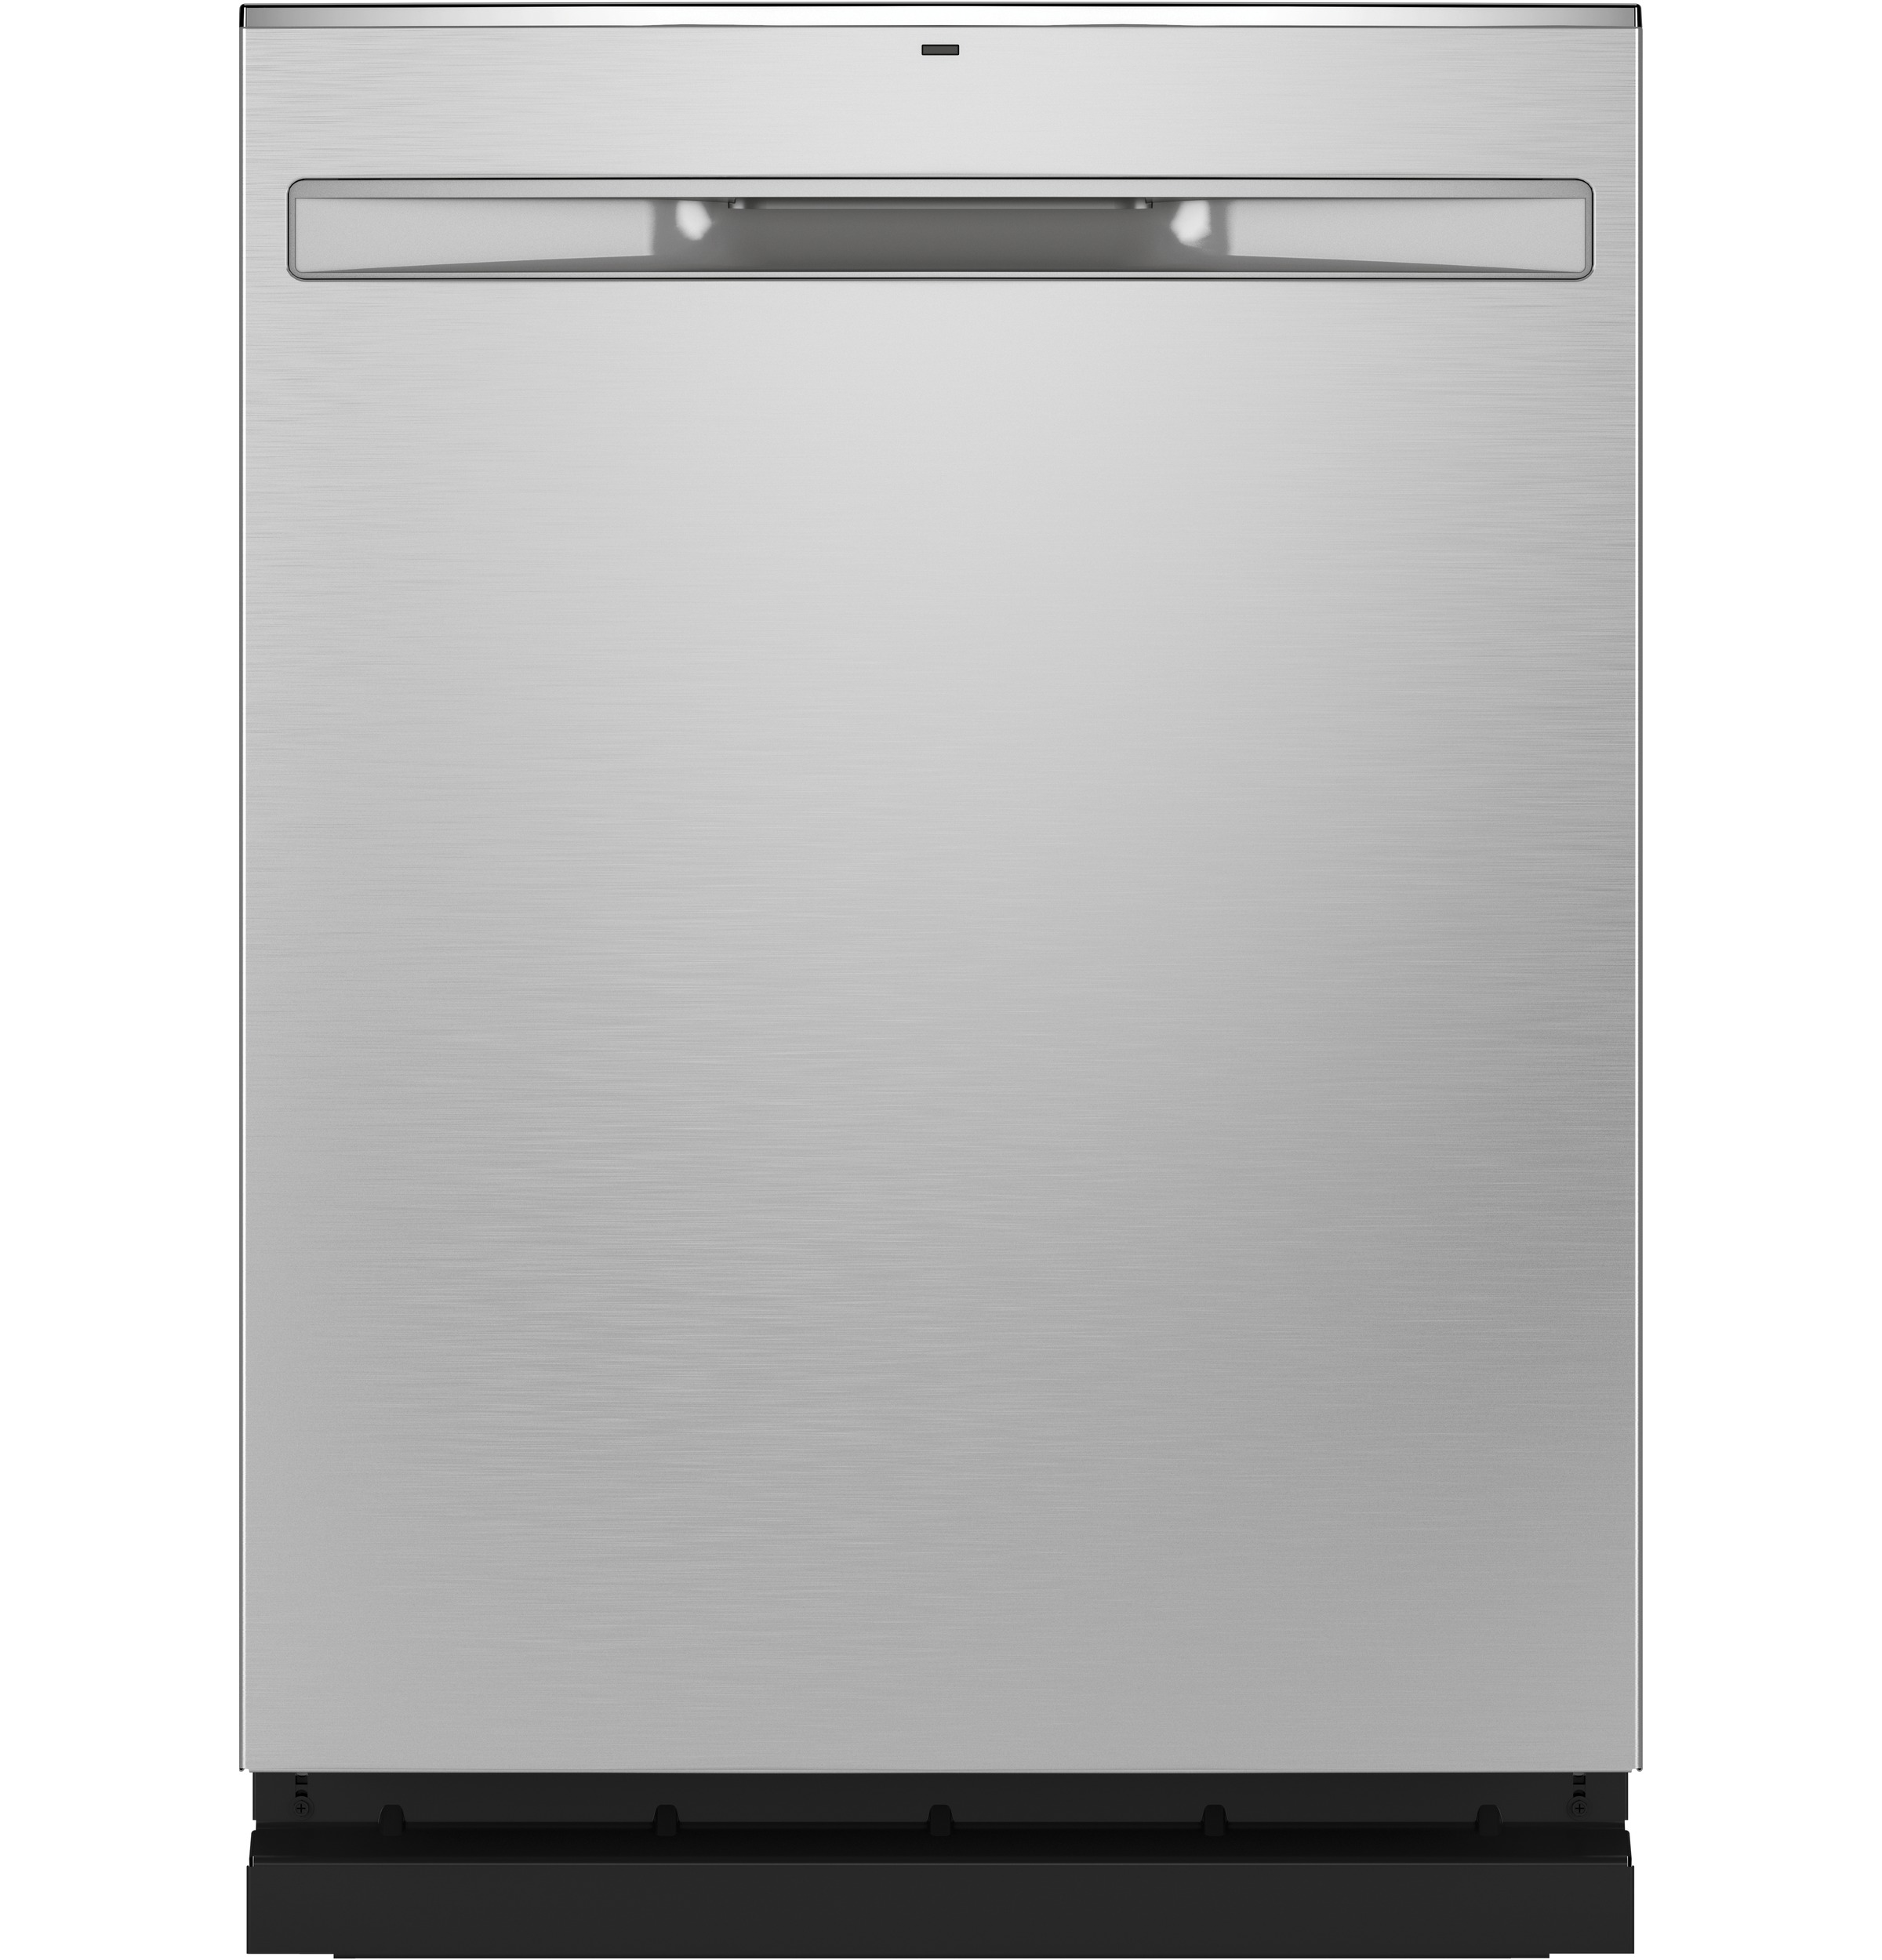 GE® ENERGY STAR® Fingerprint Resistant Top Control with Stainless Steel Interior Dishwasher with Sanitize Cycle & Dry Boost